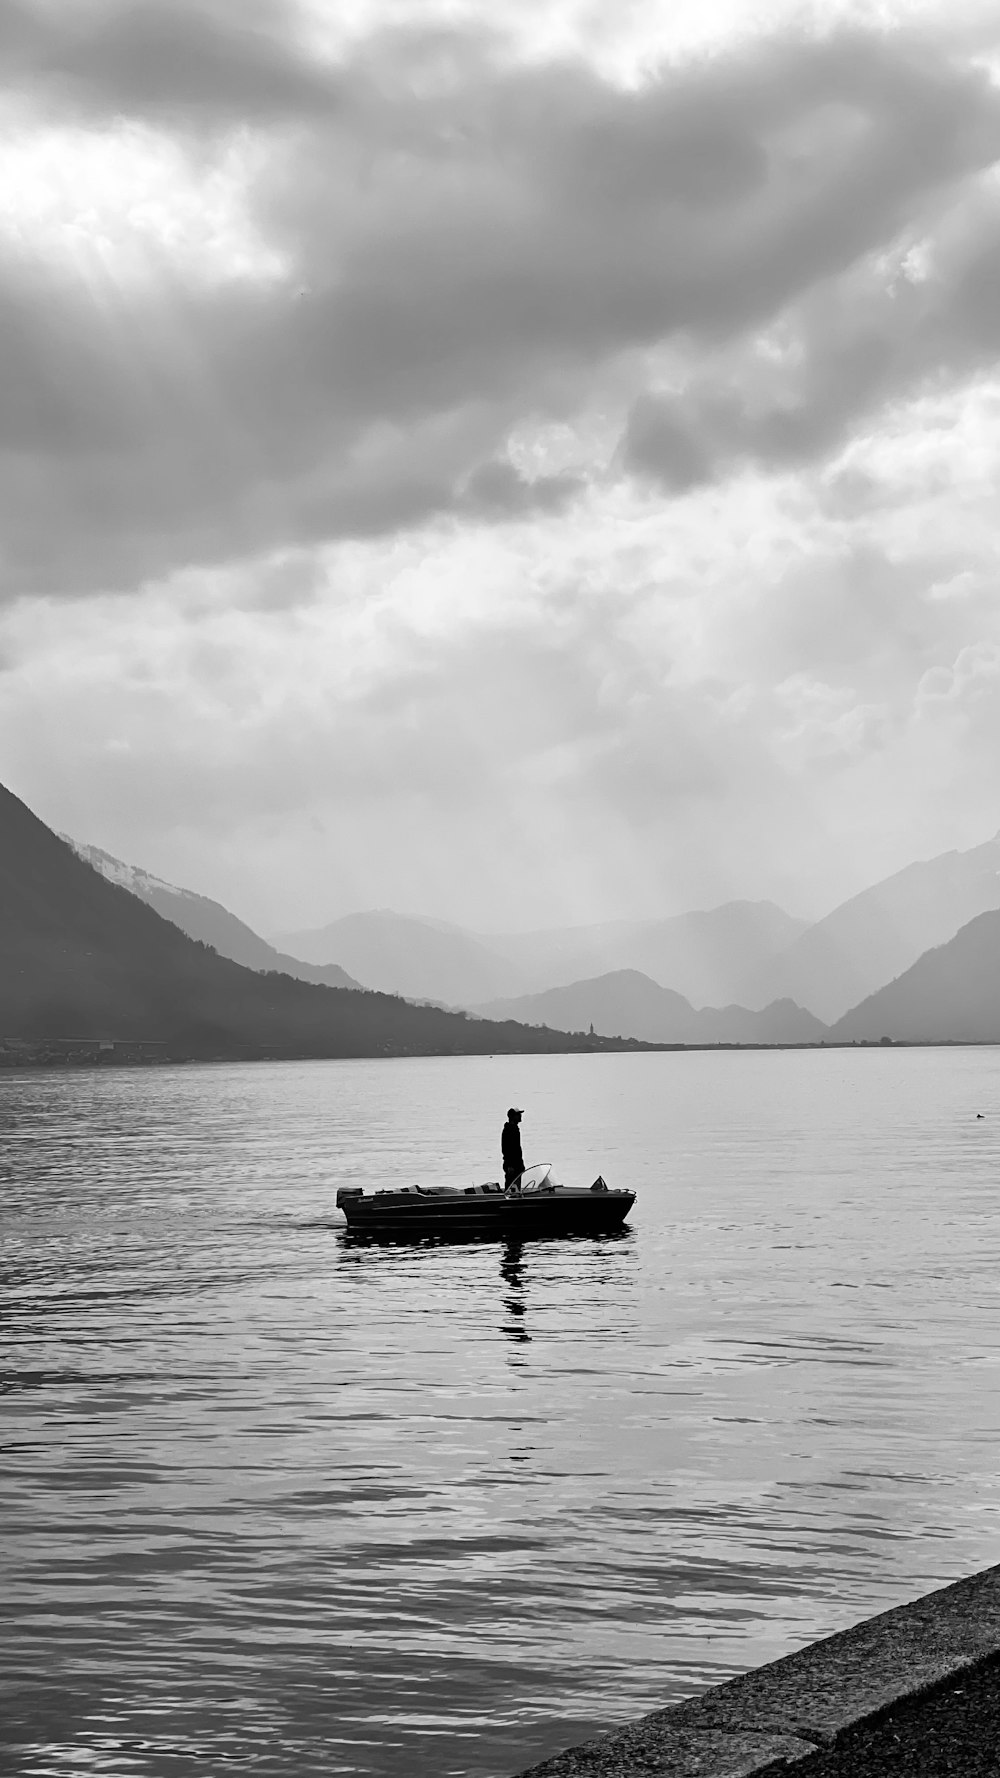 grayscale photo of 2 person riding on boat on body of water